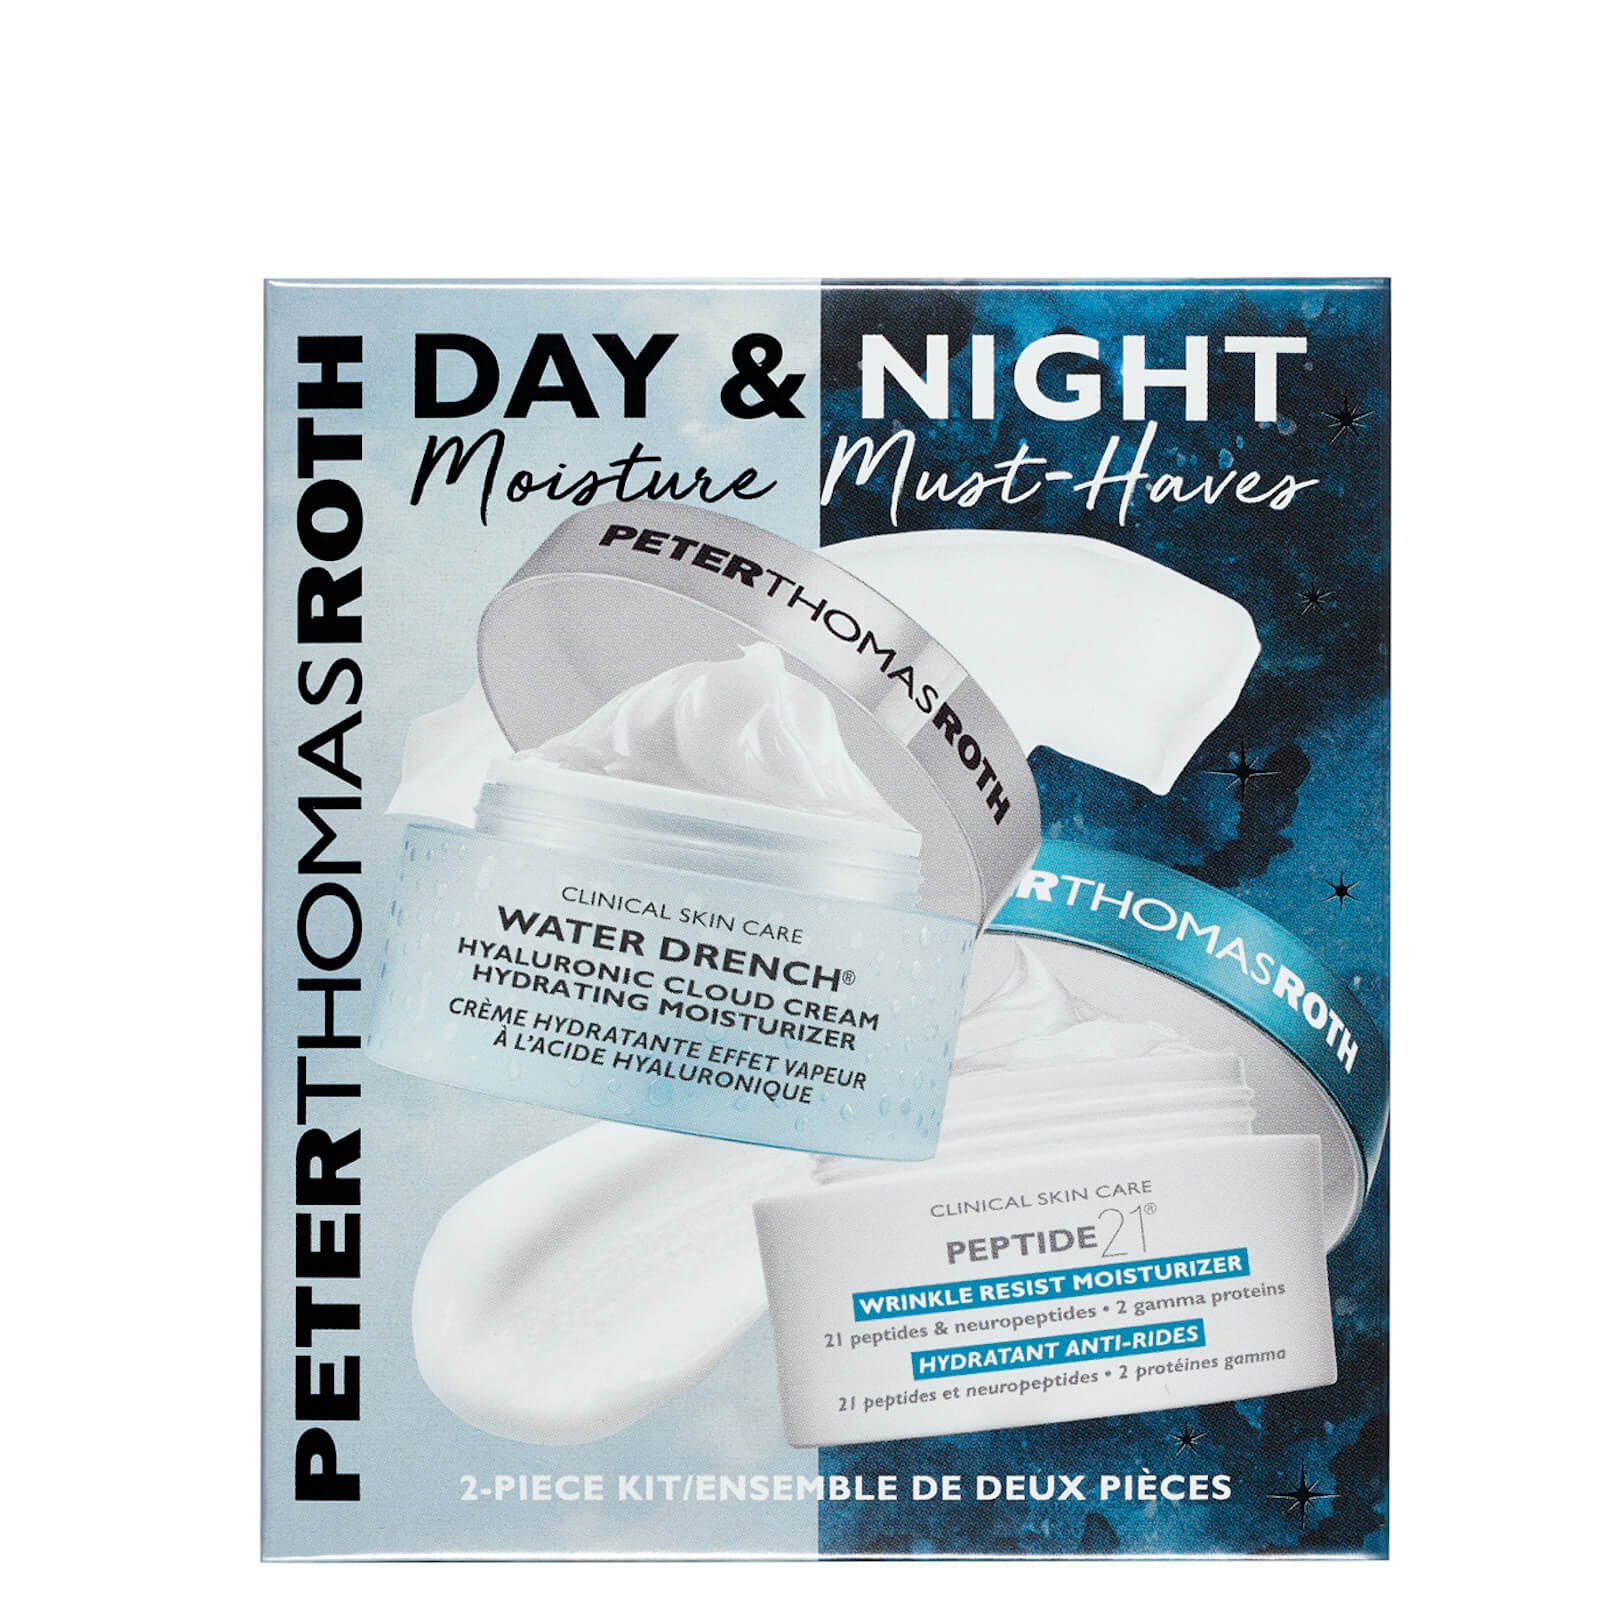 Peter Thomas Roth DAY AND NIGHT MOISTURE MUST-HAVE DUO (WORTH $69.00)